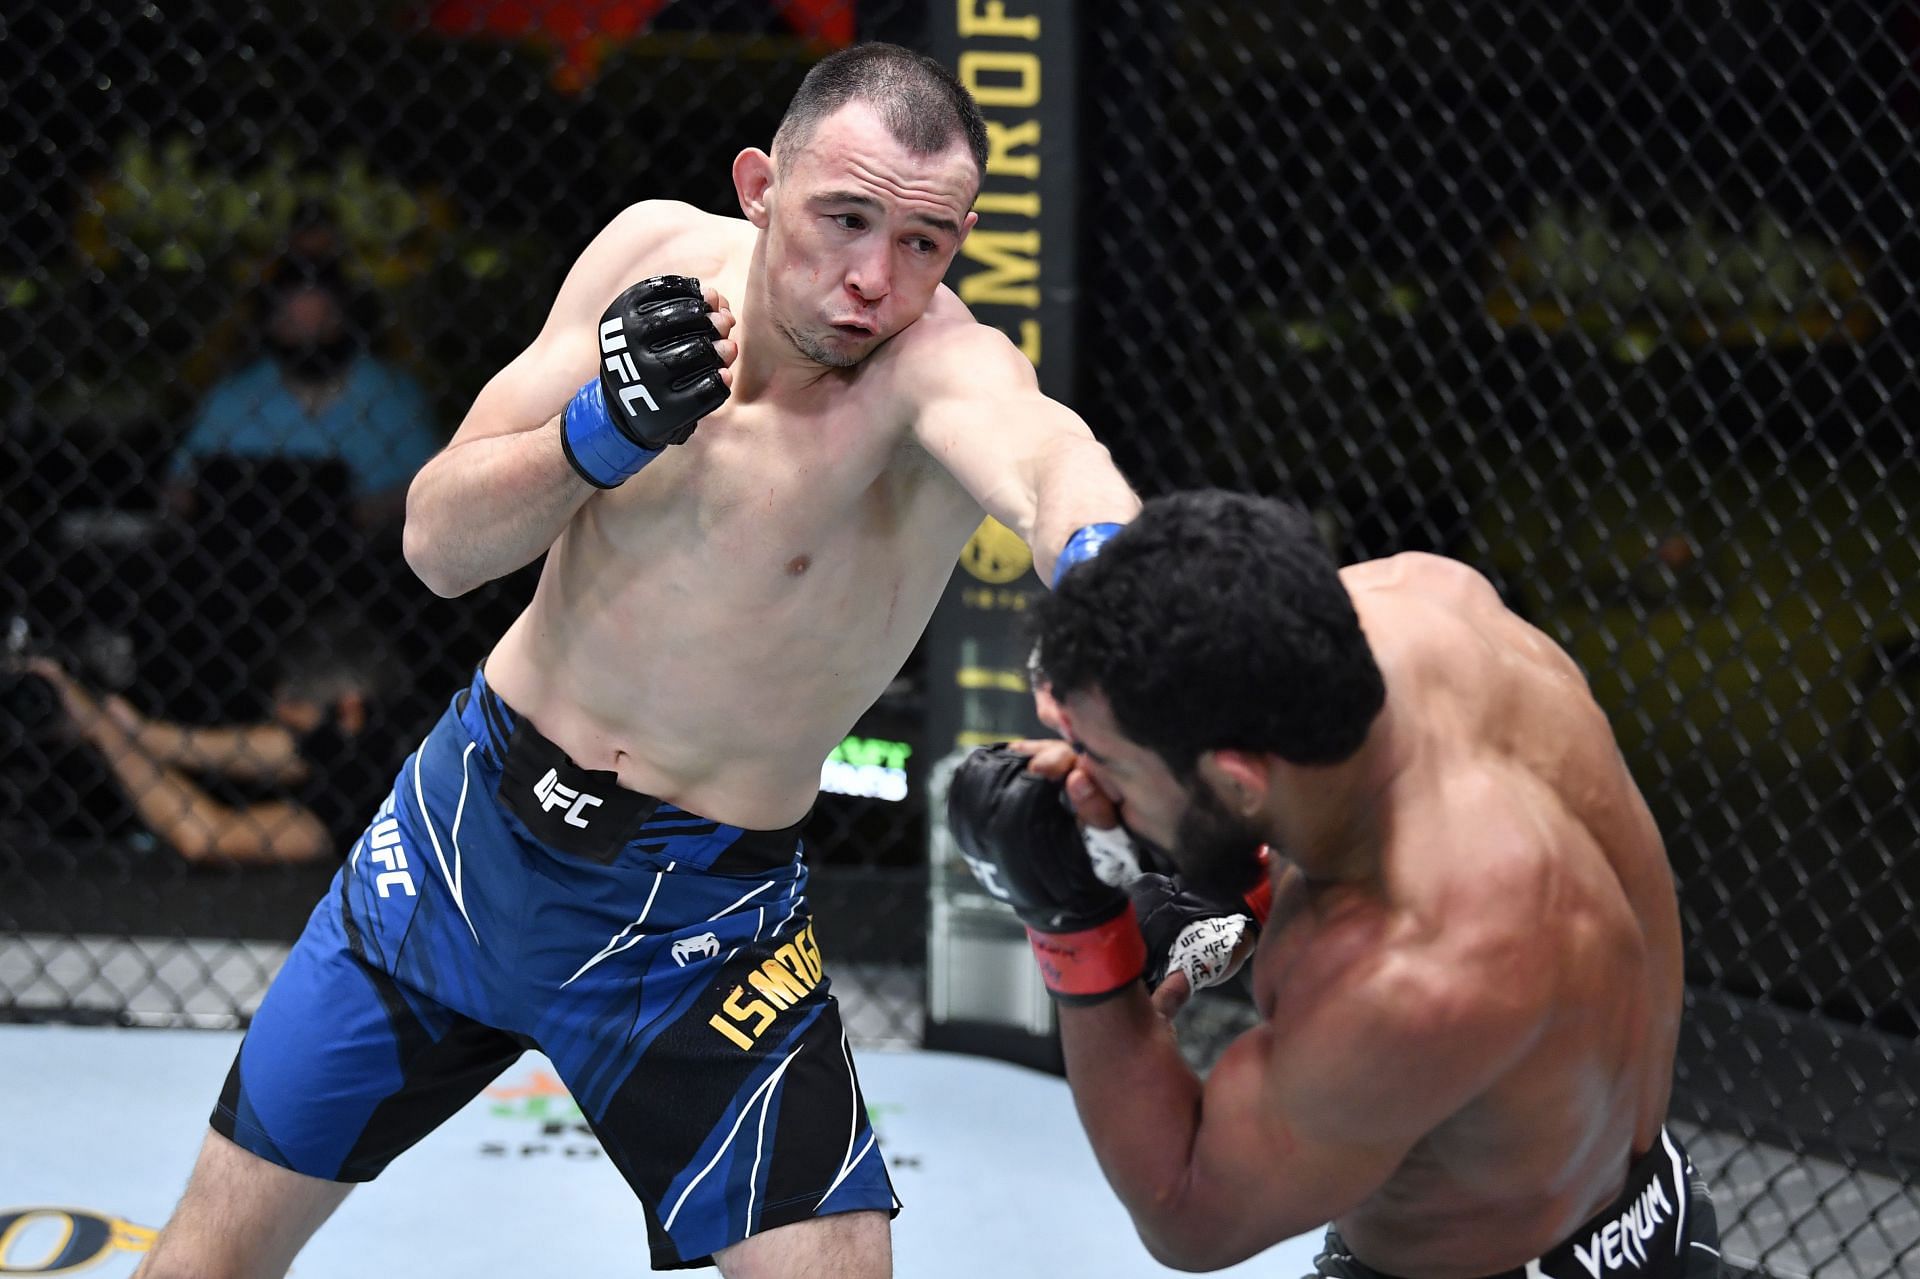 Damir Ismagulov has yet to lose a fight in the UFC